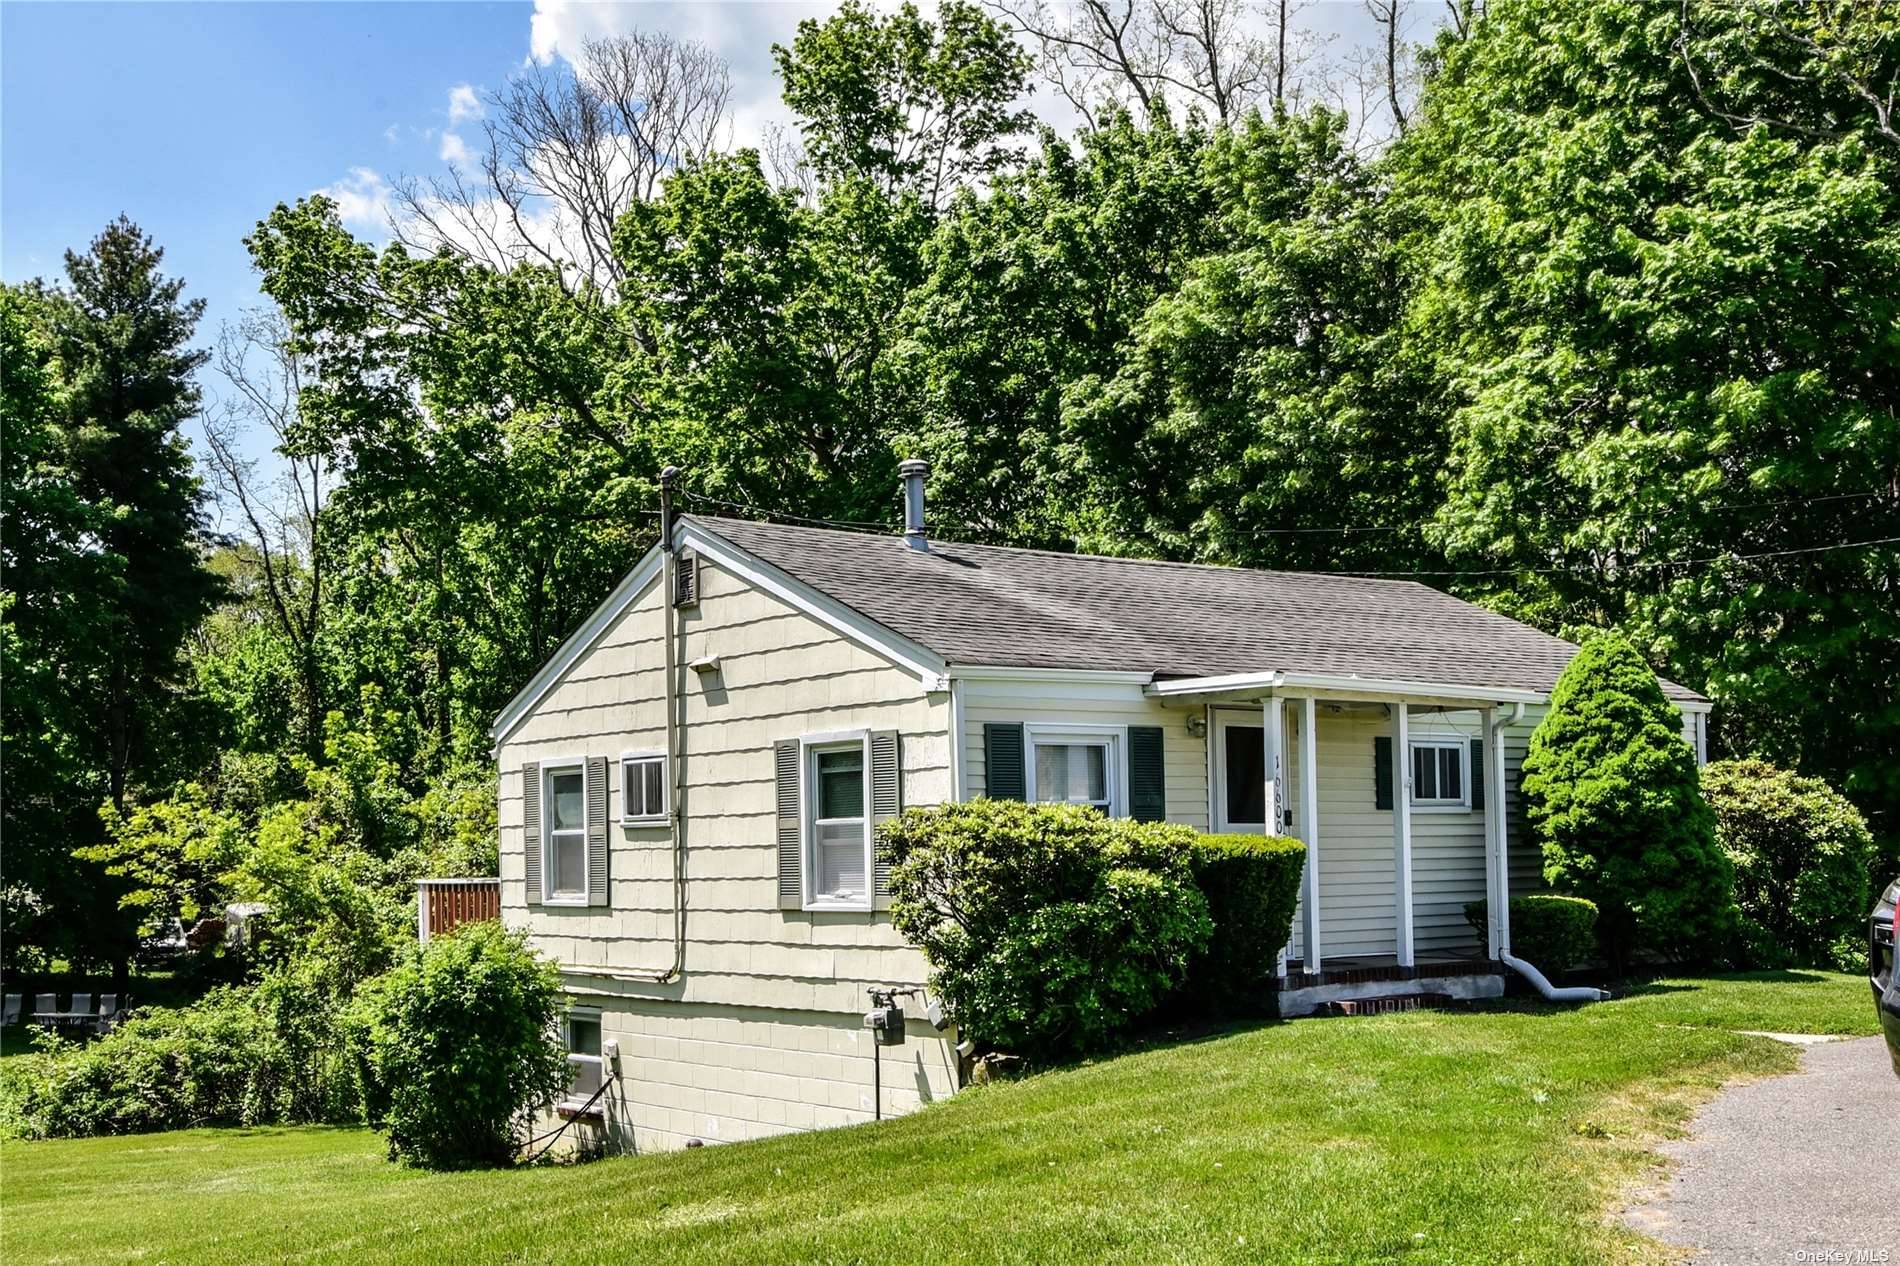 North Fork Charm Cozy 3 Bedroom Ranch Which Features Eat in Kitchen Dining Area, Living Room, Deck Great For Entertaining, Full Basement w Walk Out amp ; Full Bath.